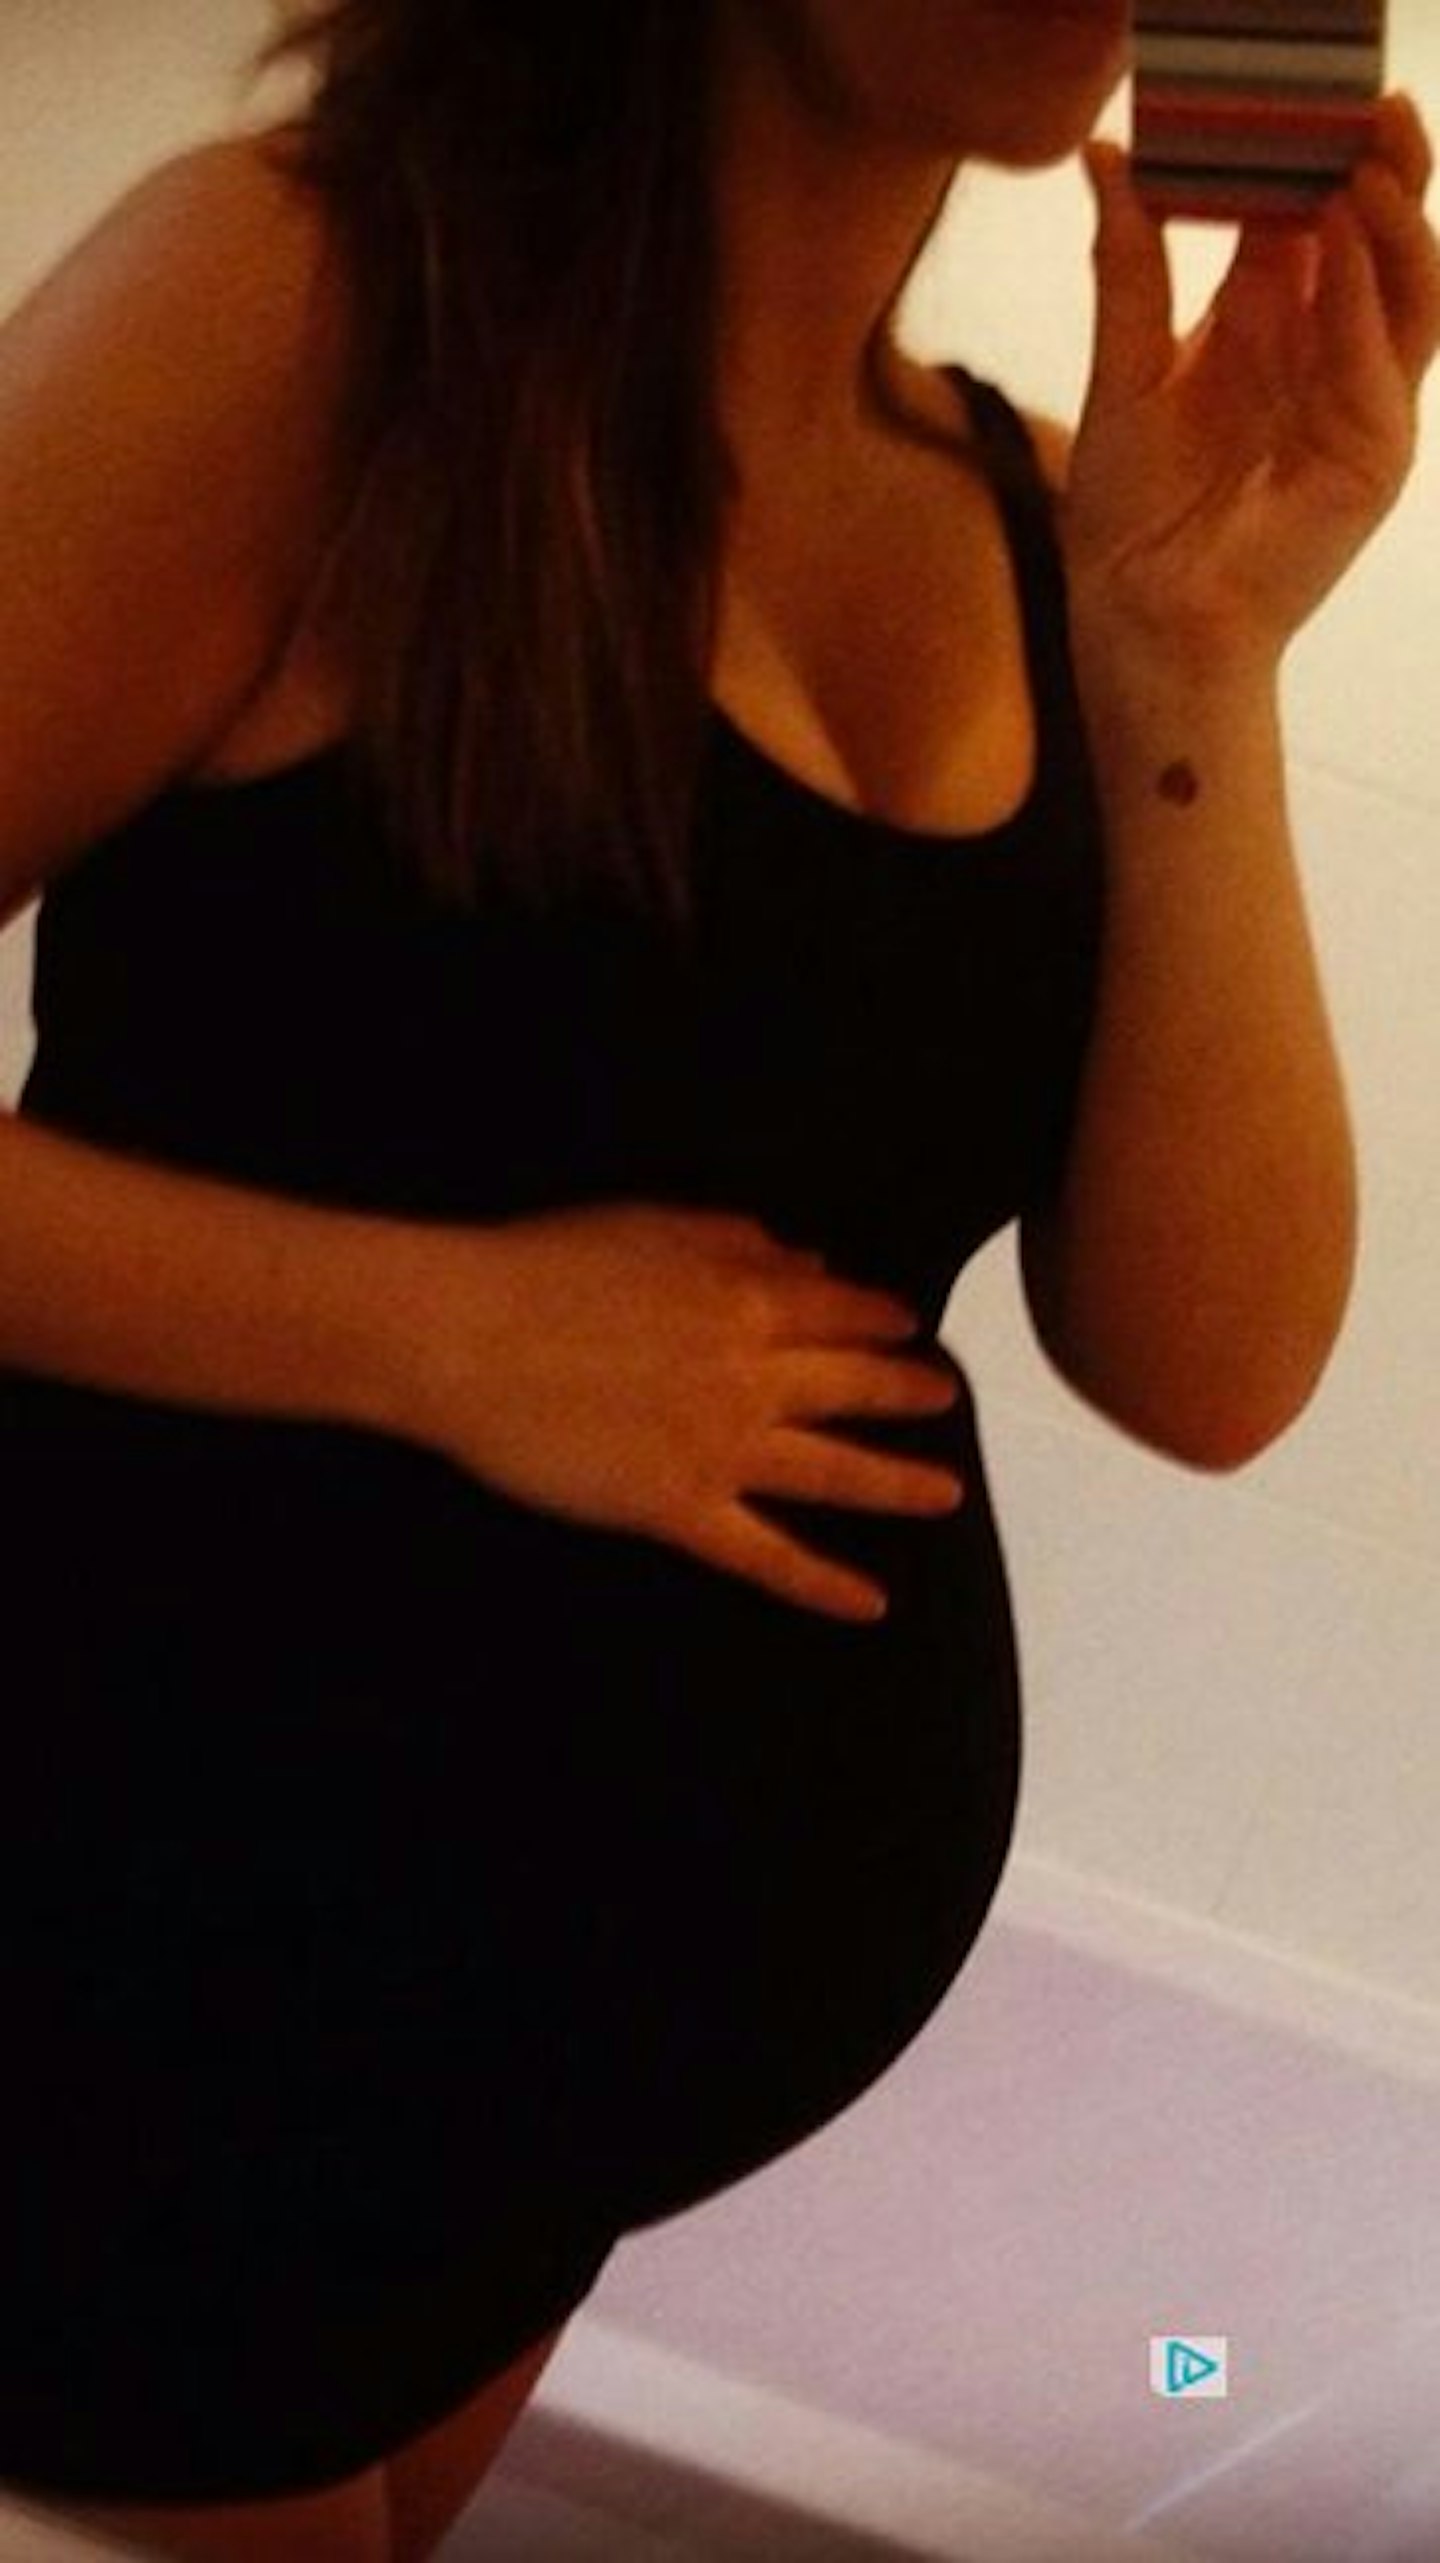 Natasha only has a few weeks left until baby no.3 arrives